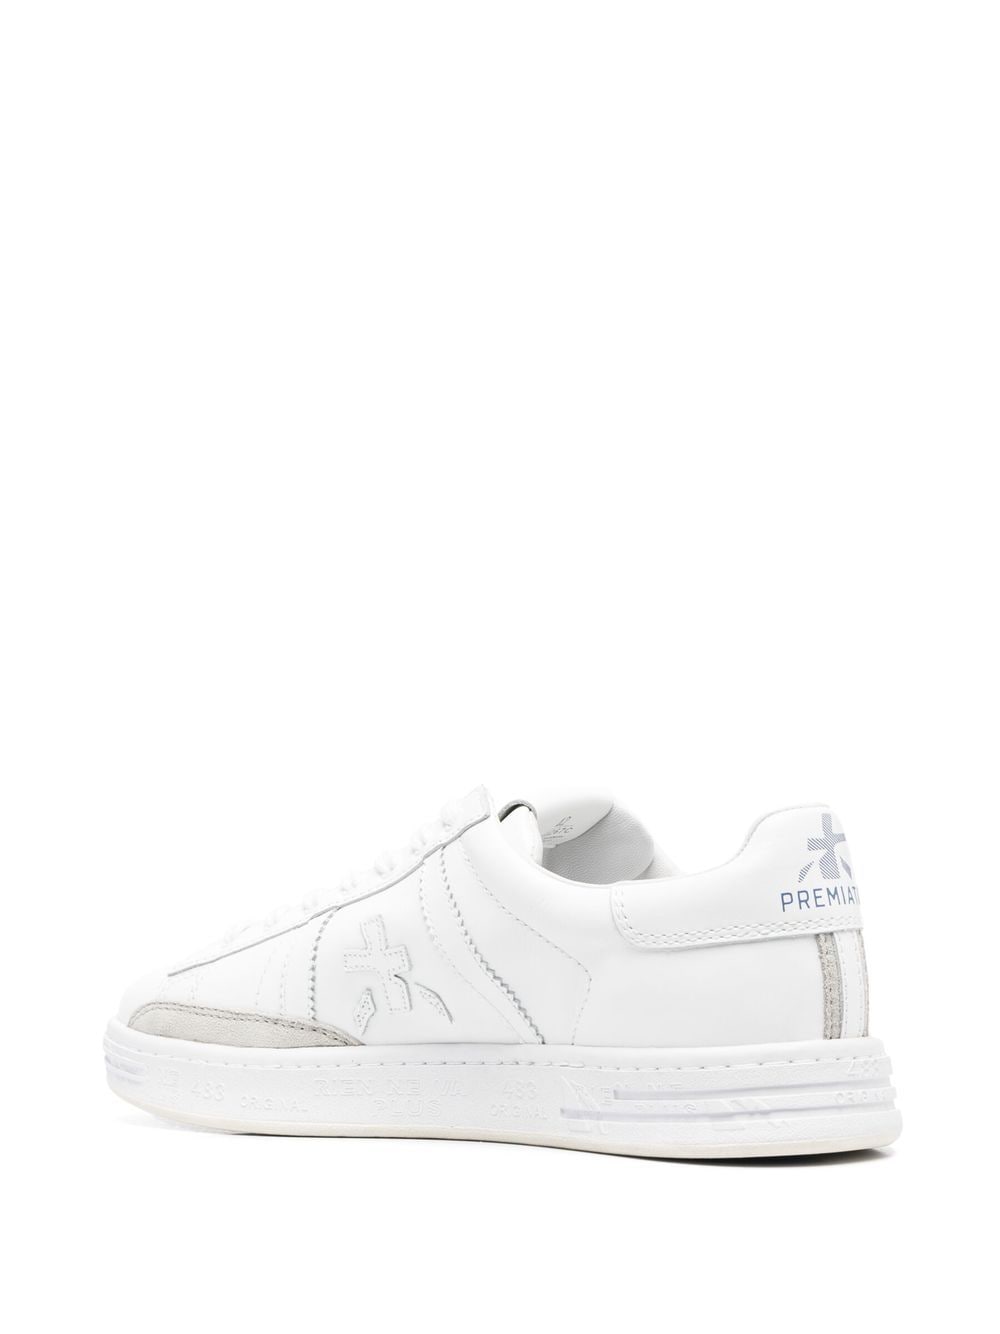 'Russell 6267' sneakers